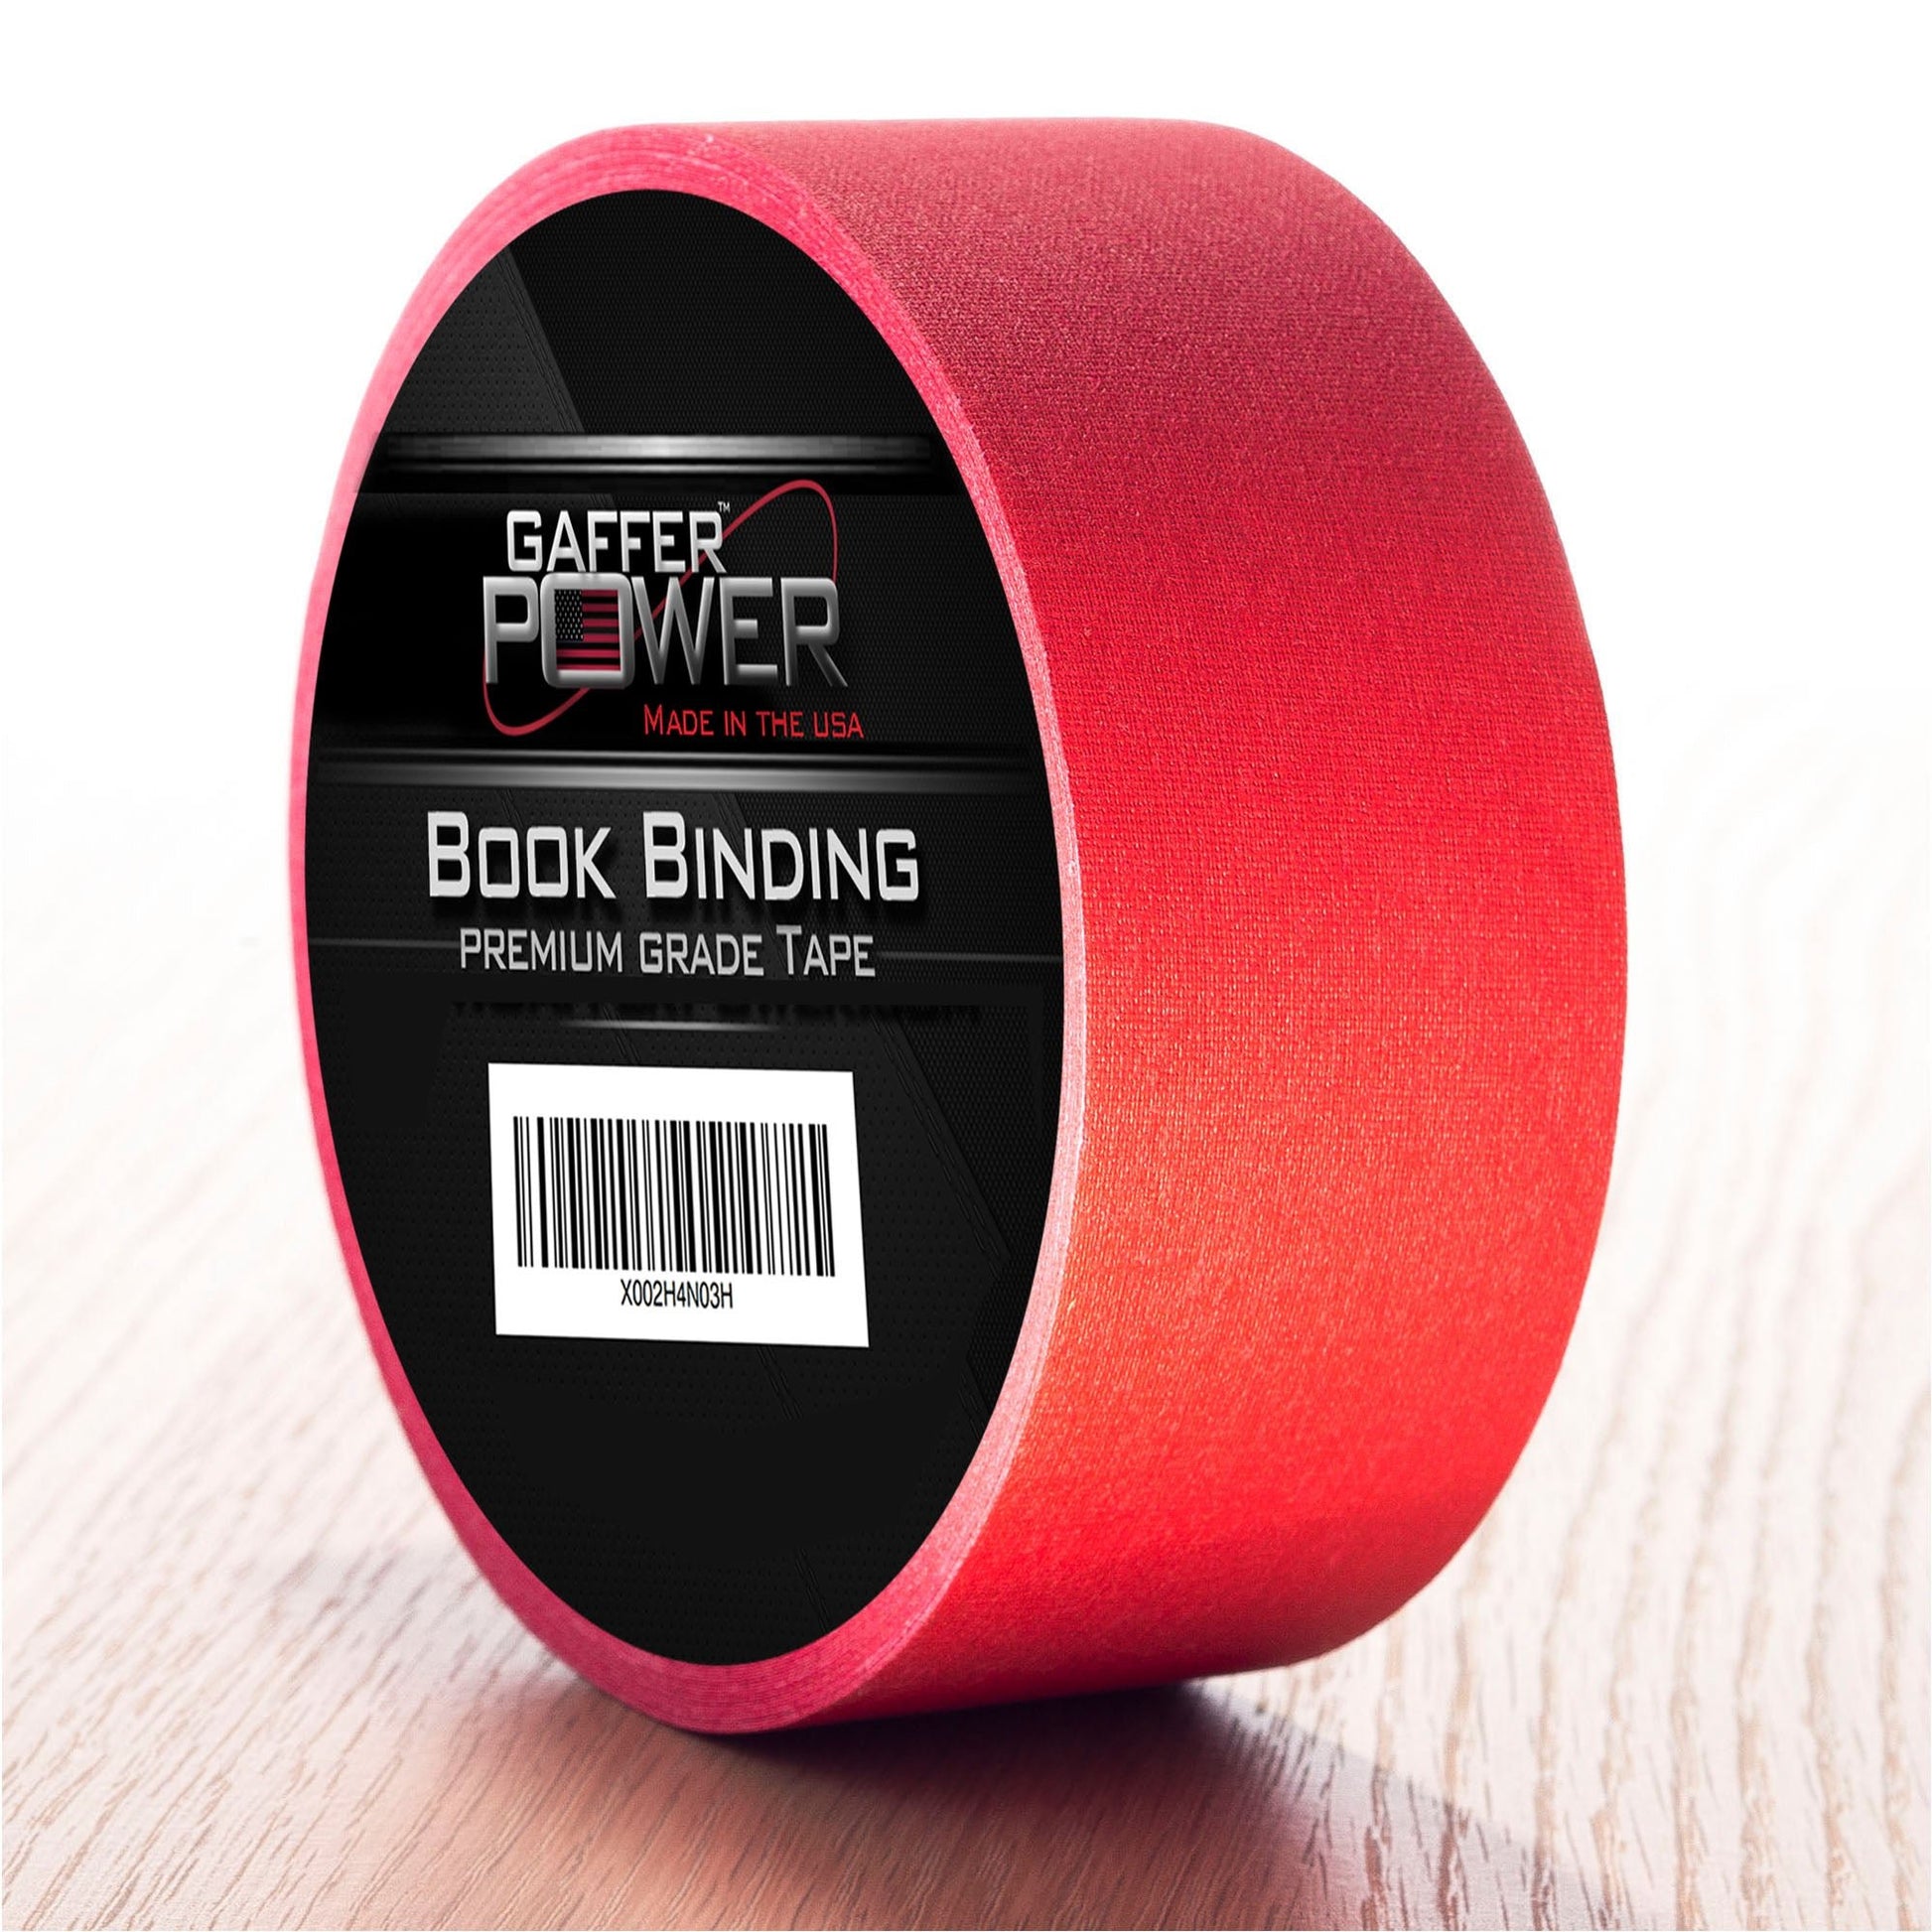 Gaffer Power Bookbinding Tape, White Cloth Book Repair Tape Safe Cloth Library Book Hinging Repair Tape, Made in The USA, Acid Free and Archival Safe